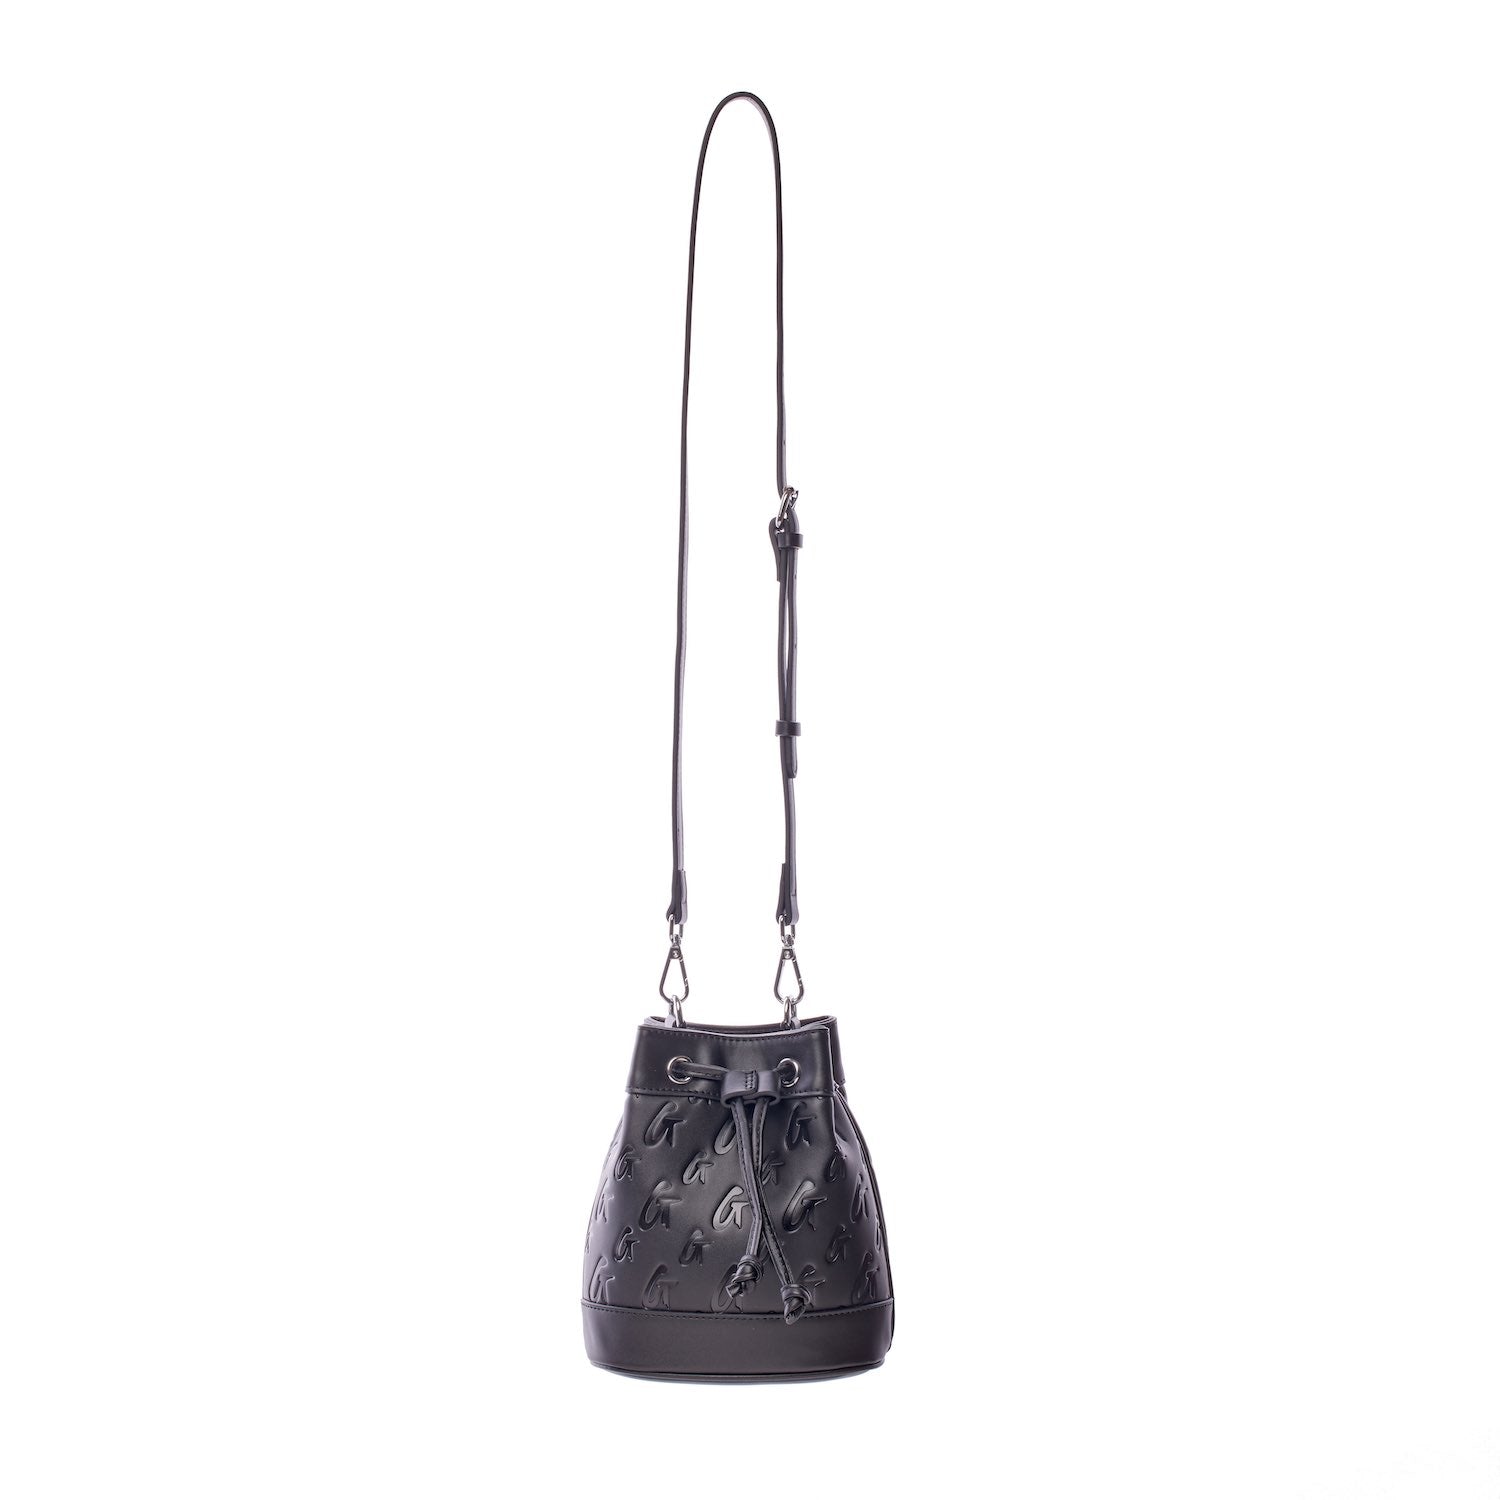 GLAM-AHOLIC LIFESTYLE LARGE MATTE BLACK BUCKET BAG by Mia Ray